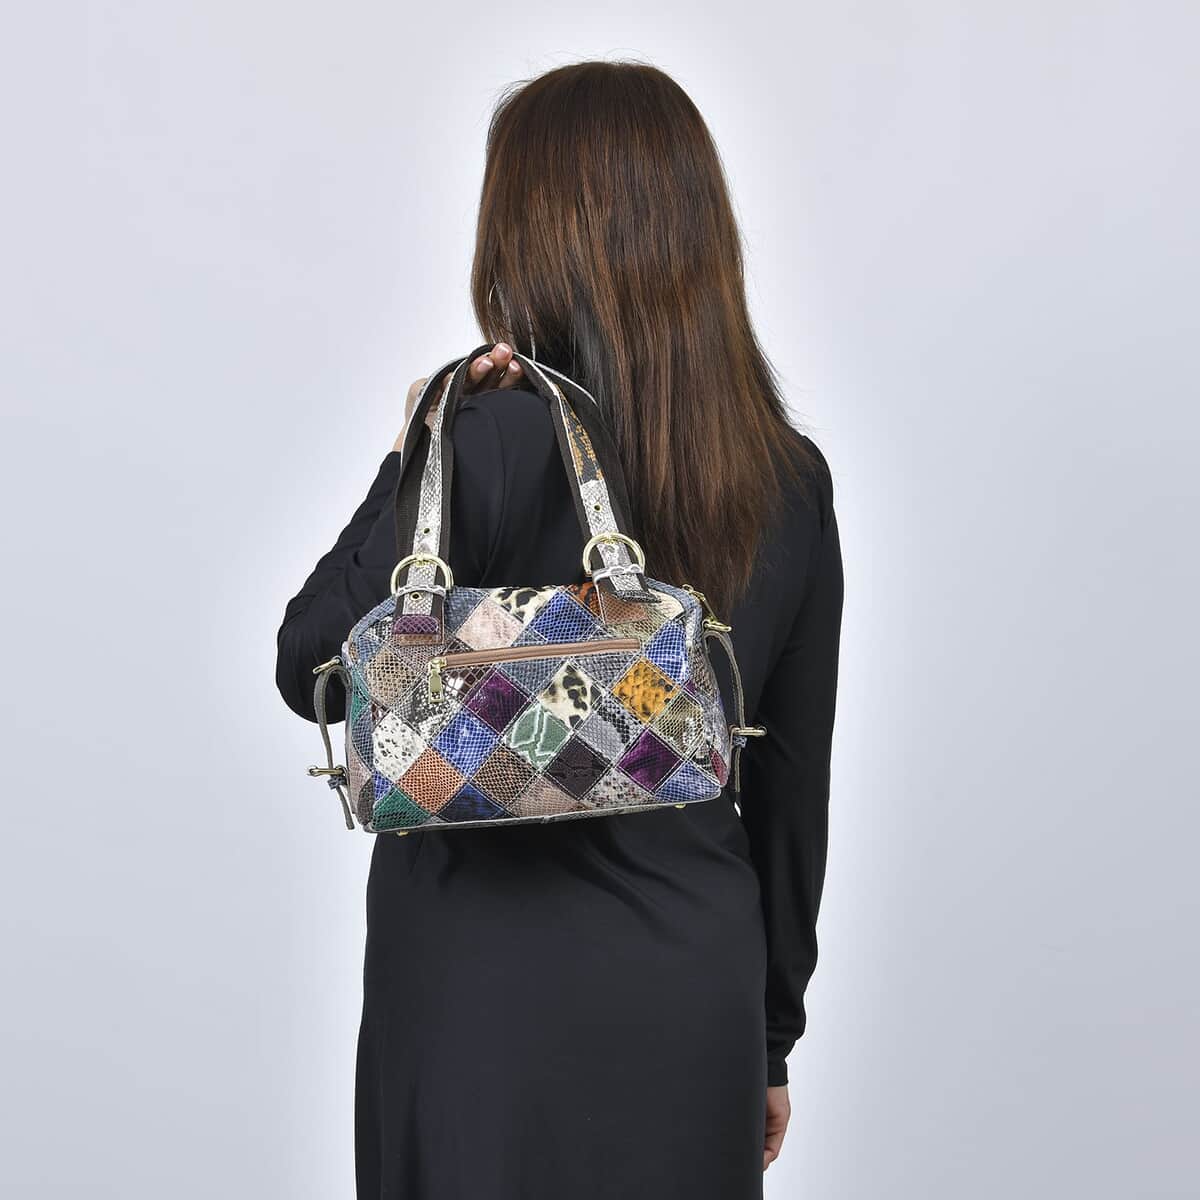 CHAOS Rainbow Color Snake Print Genuine Leather Convertible Tote Bag (12"x5"x9") with Long Strap image number 2